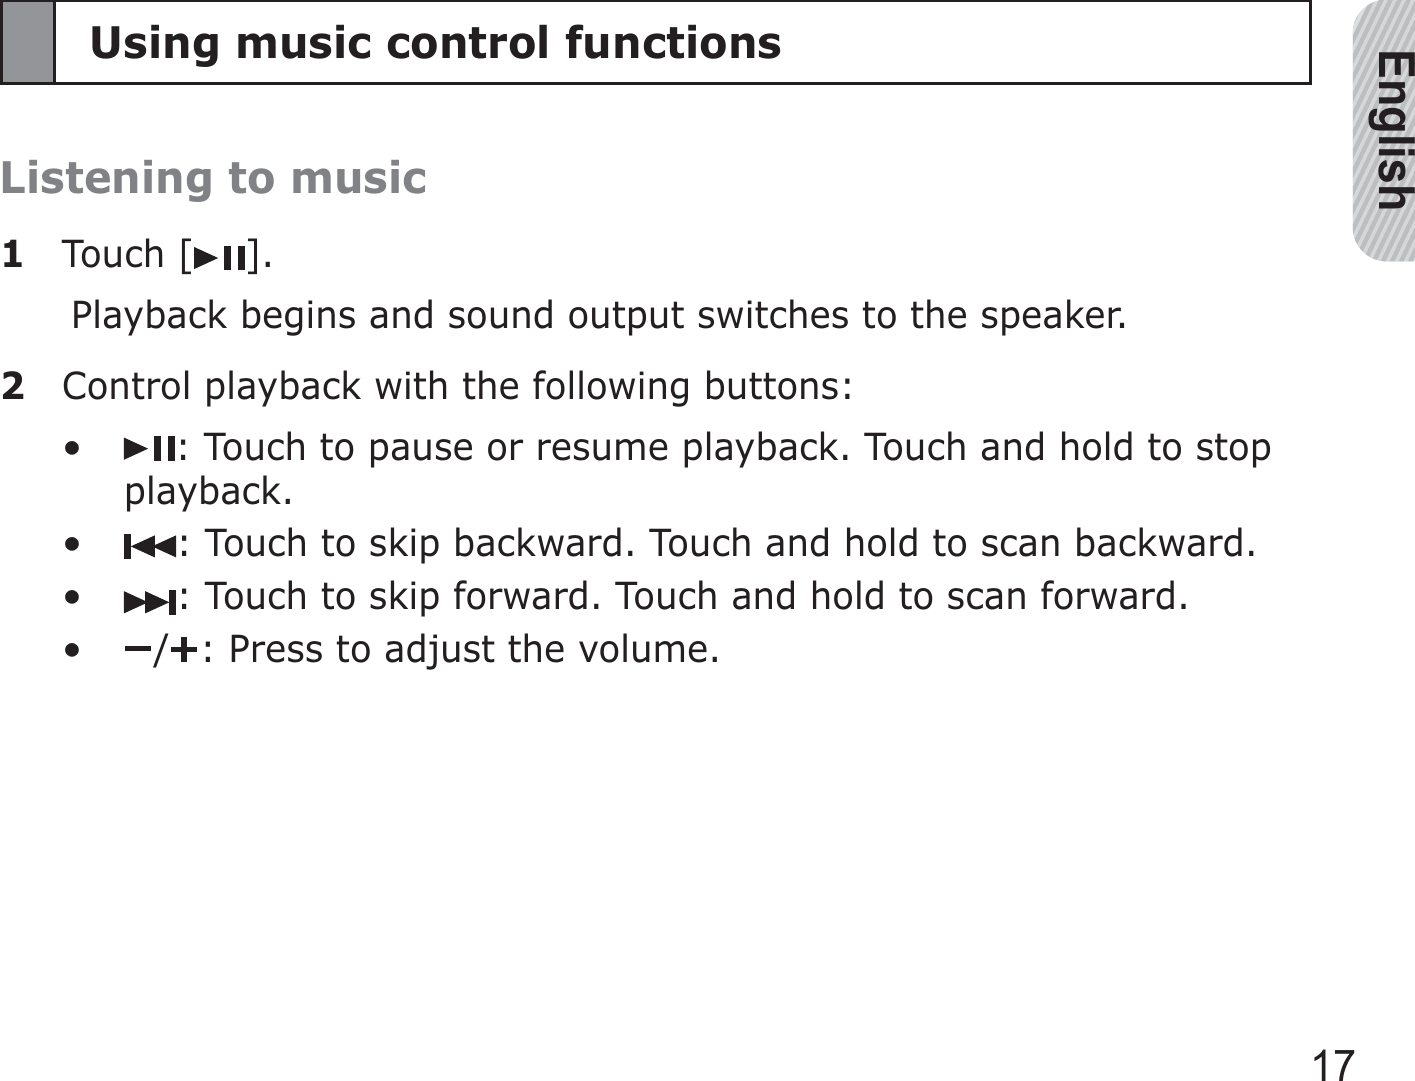 English17Using music control functionsListening to music1 Touch [ ].Playback begins and sound output switches to the speaker.2  Control playback with the following buttons:: Touch to pause or resume playback. Touch and hold to stop playback.: Touch to skip backward. Touch and hold to scan backward.: Touch to skip forward. Touch and hold to scan forward./ : Press to adjust the volume.••••